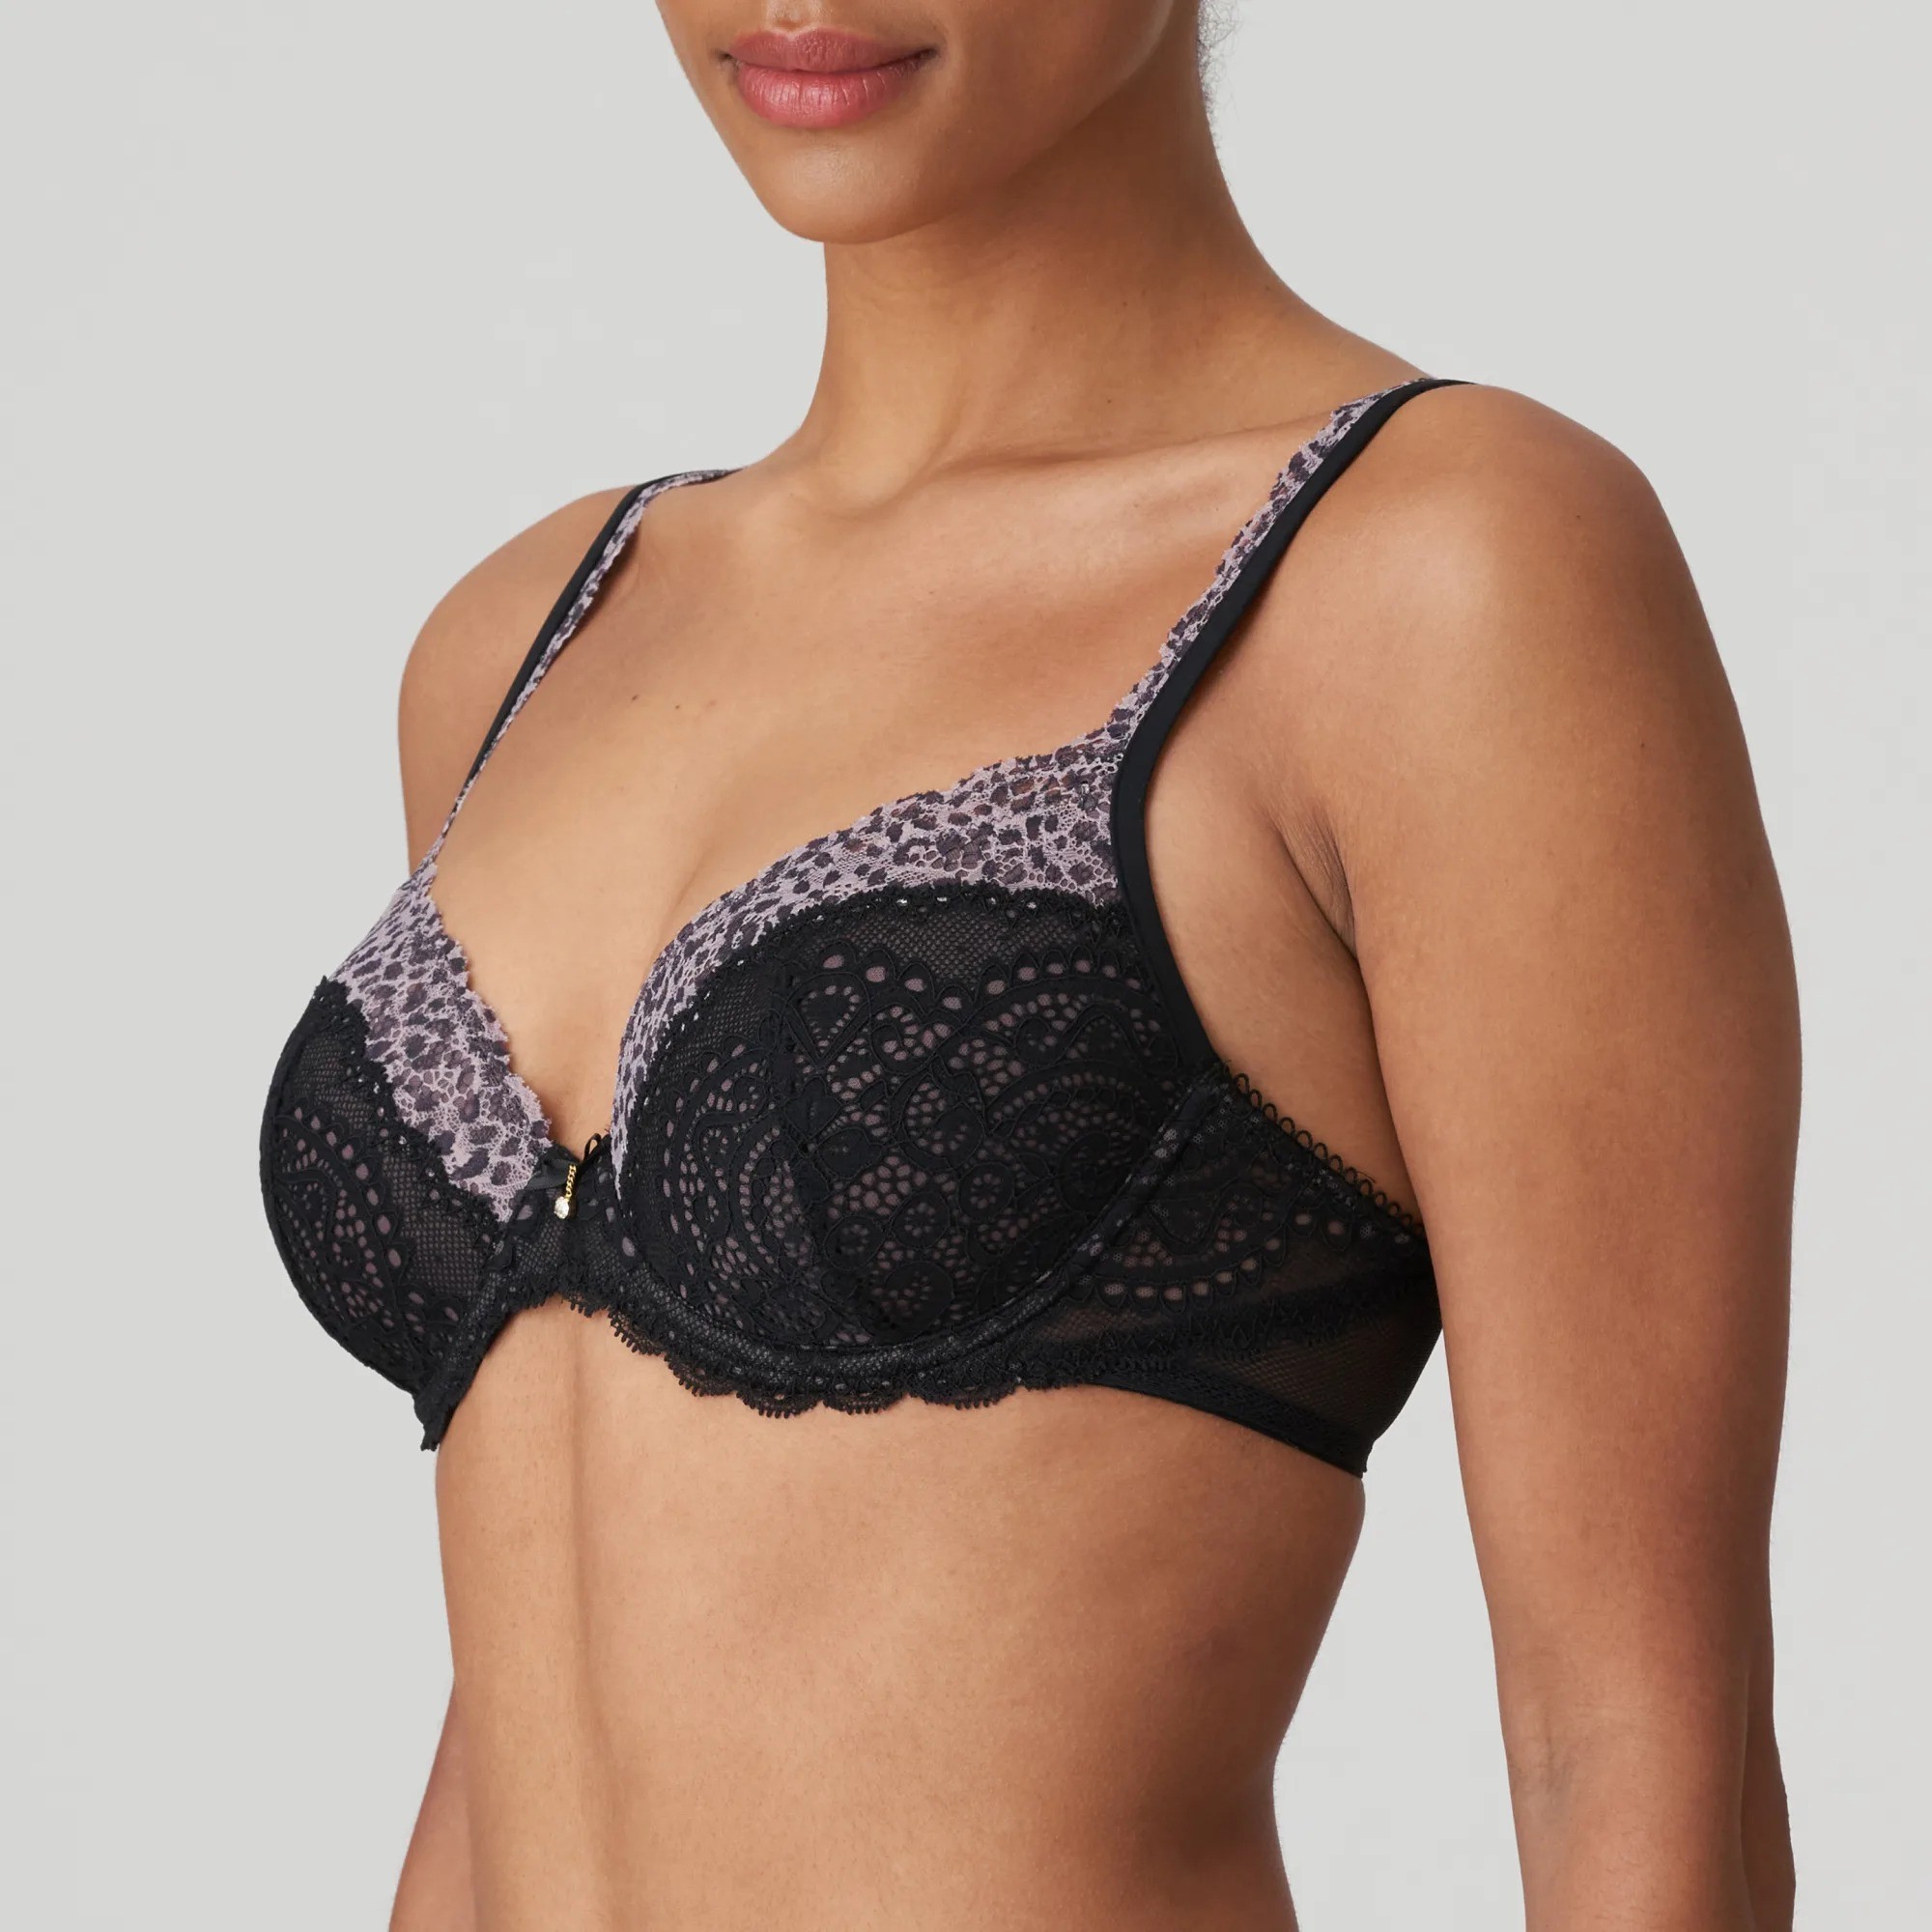 Discover the Perfect Marie Jo Bras - Comfort, Style, and Cup Sizes